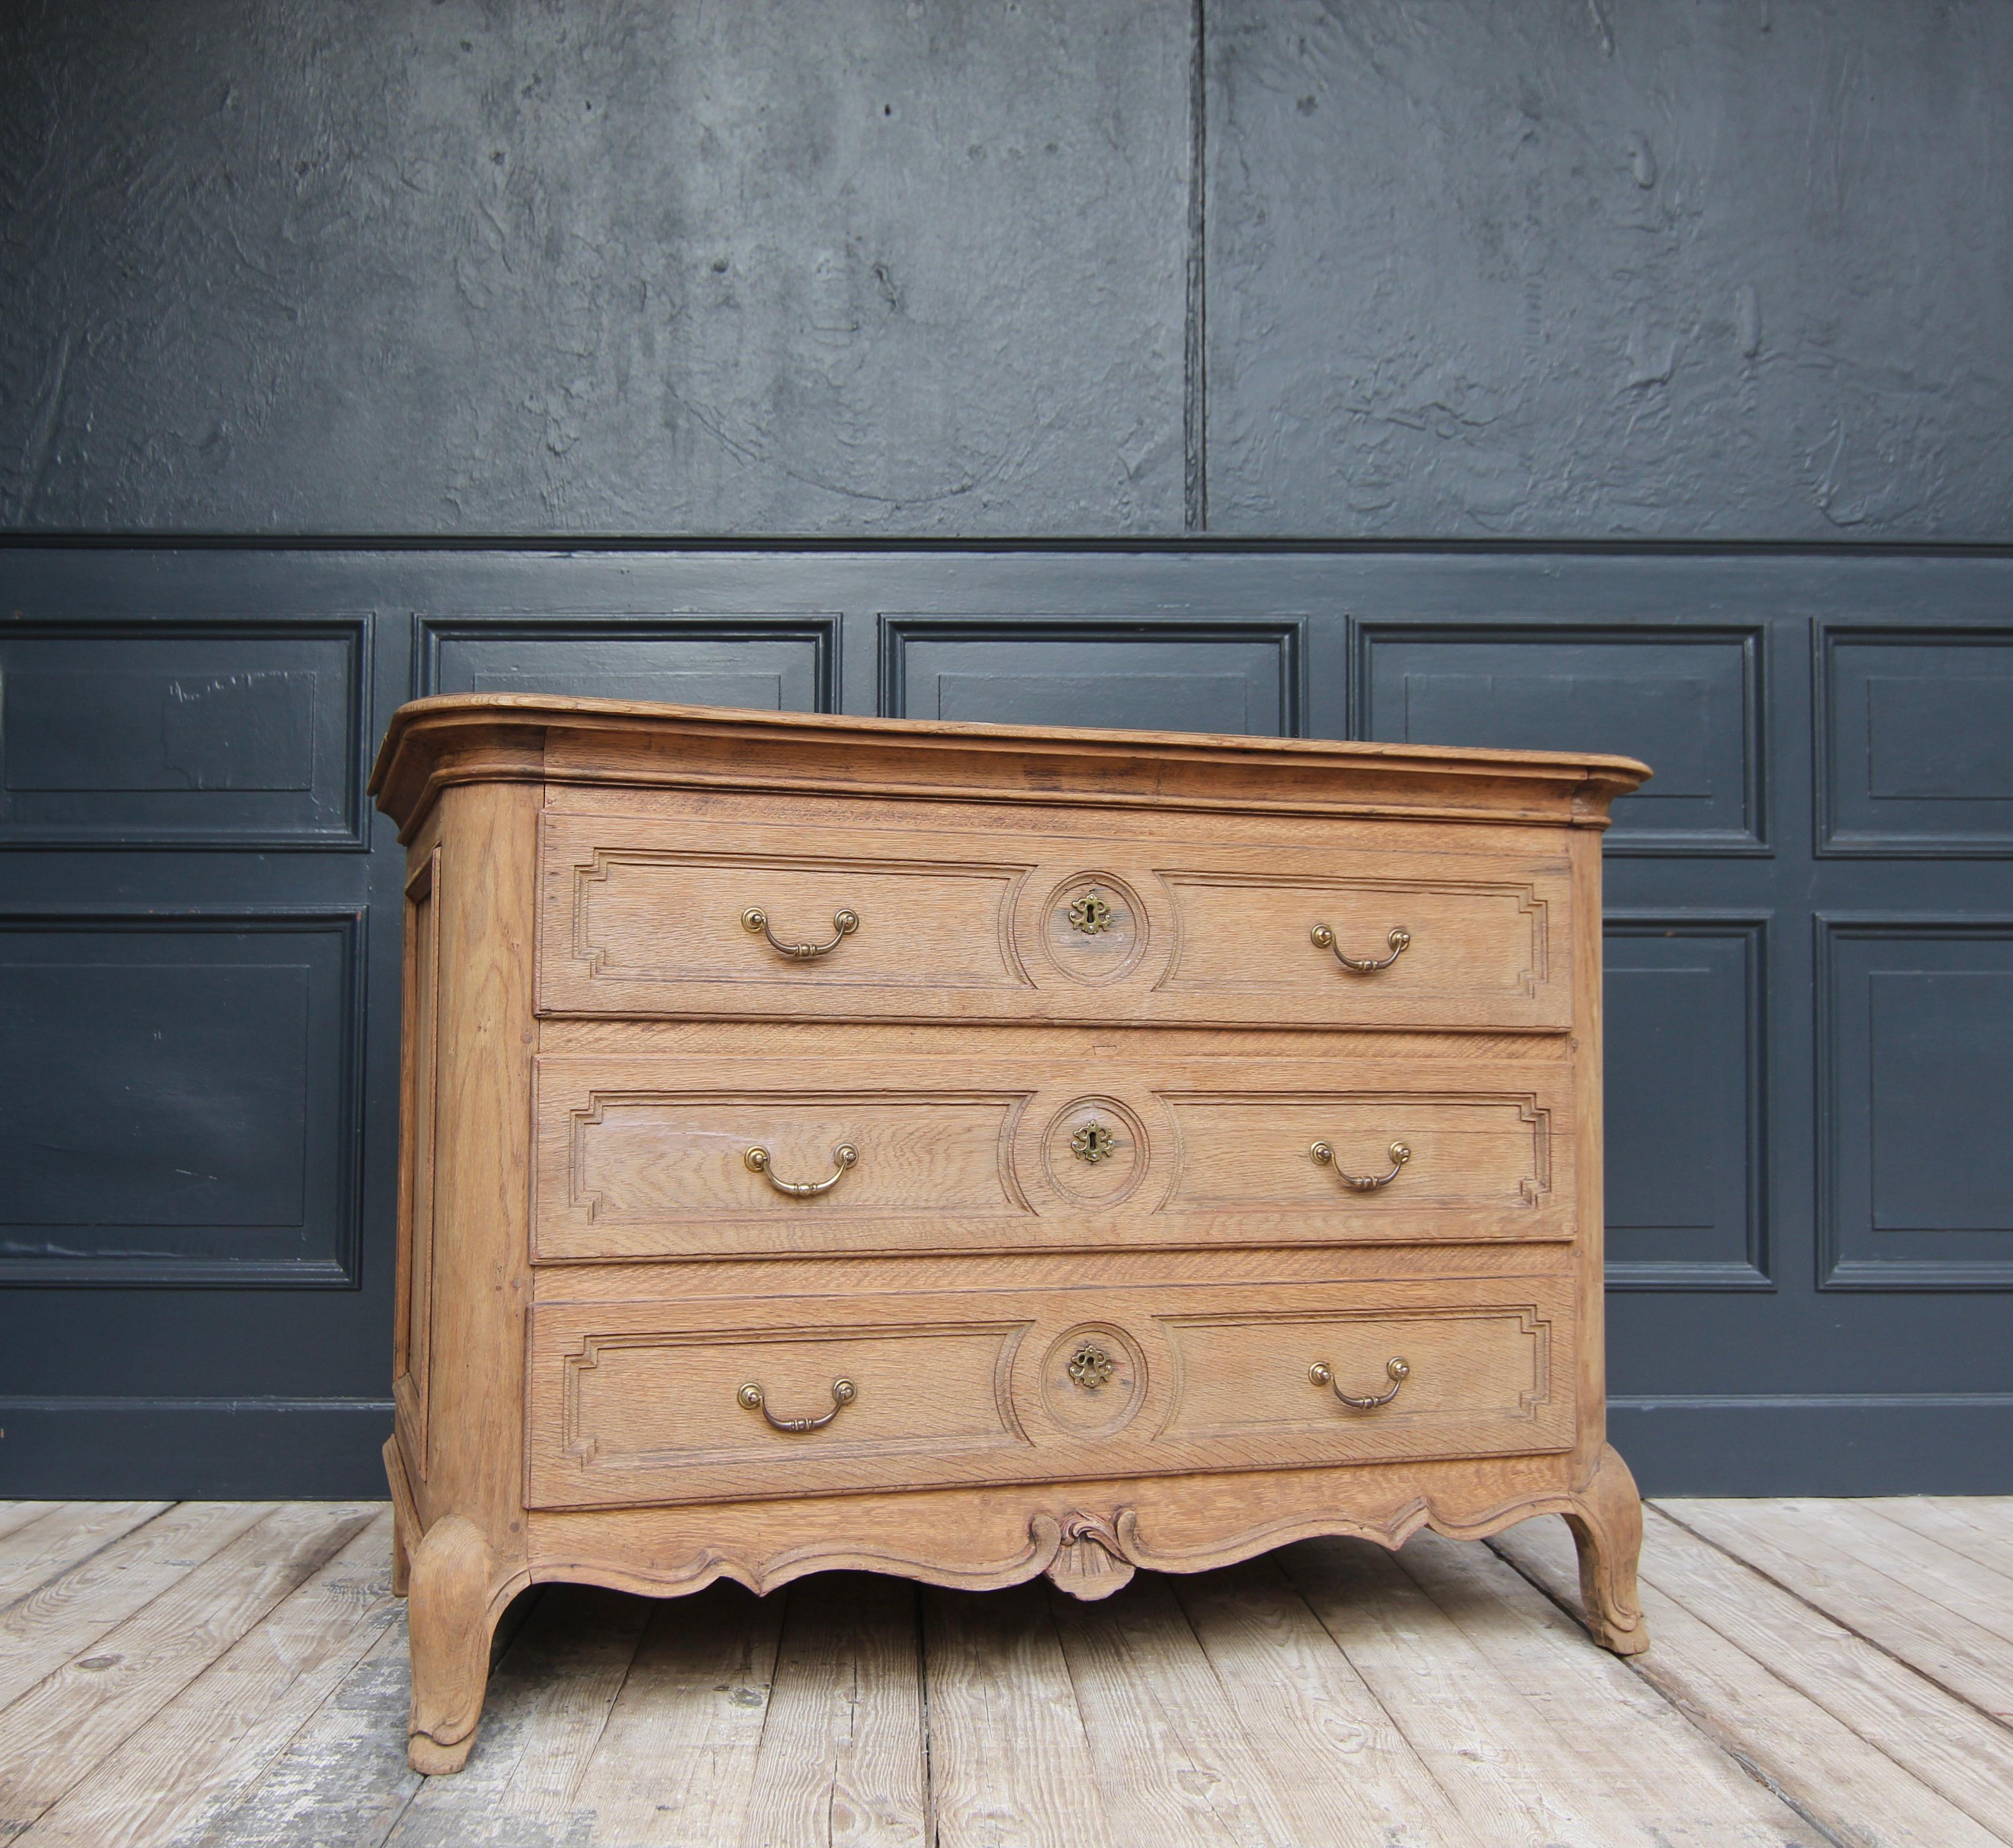 A early 19th century provincial chest of drawers made from solid oak. 

Laterally coffered oak body with three drawers, rounded corners and matching moulded top panel. Multiple curved moulded plinth frame with carved shell-shaped central cartouche